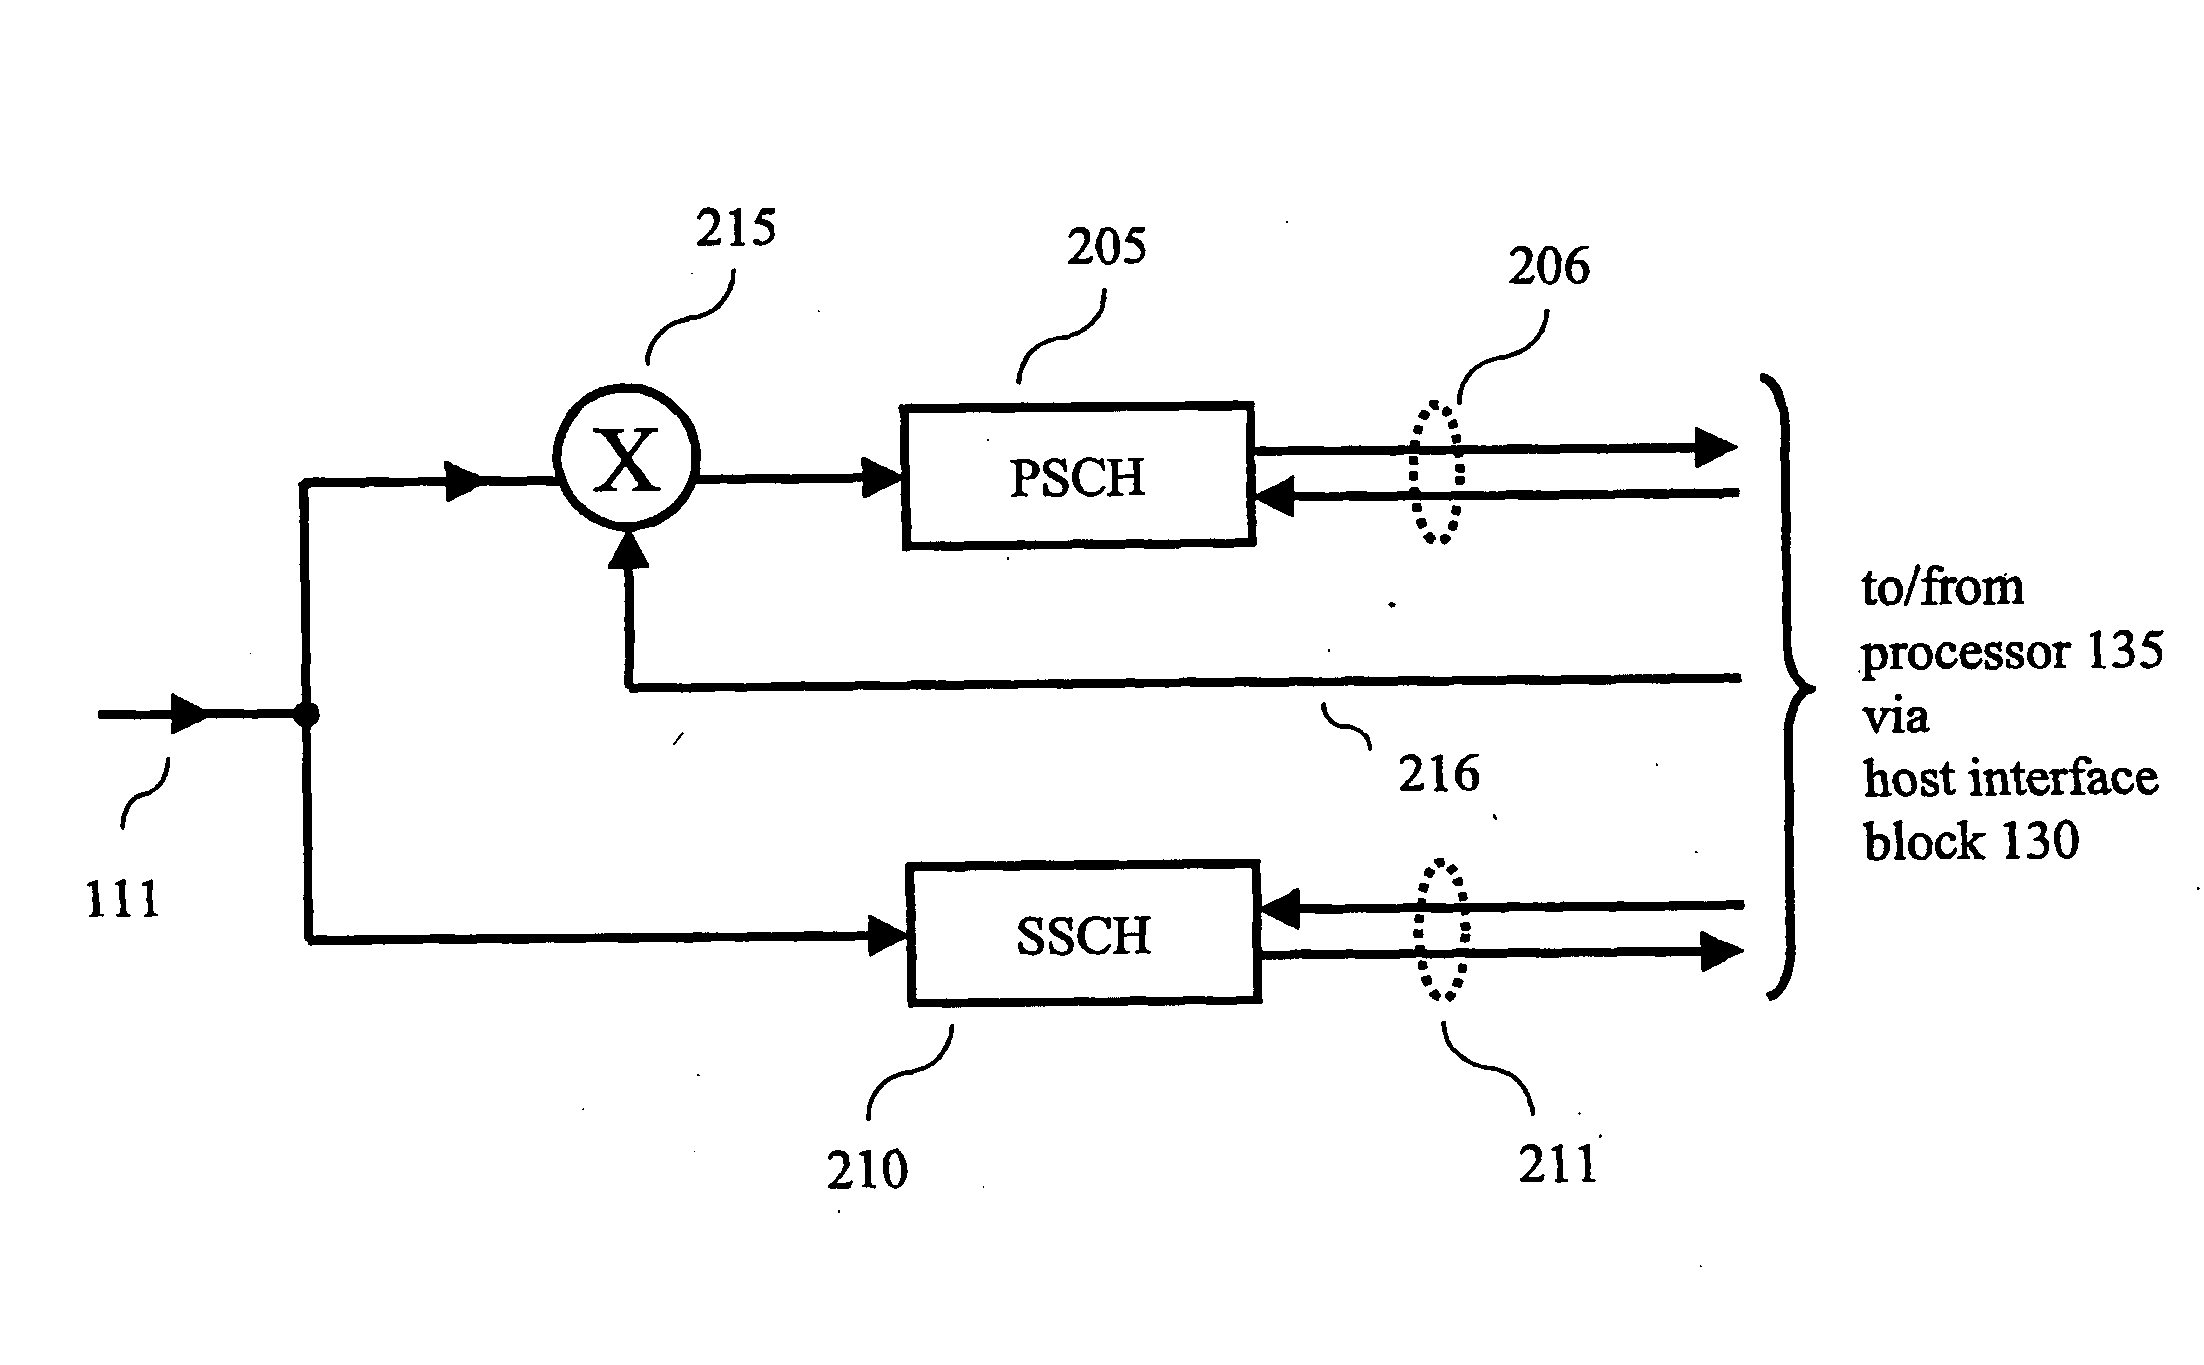 Frequency Synchronization During Cell Search in a Universal Mobile Telephone System Receiver